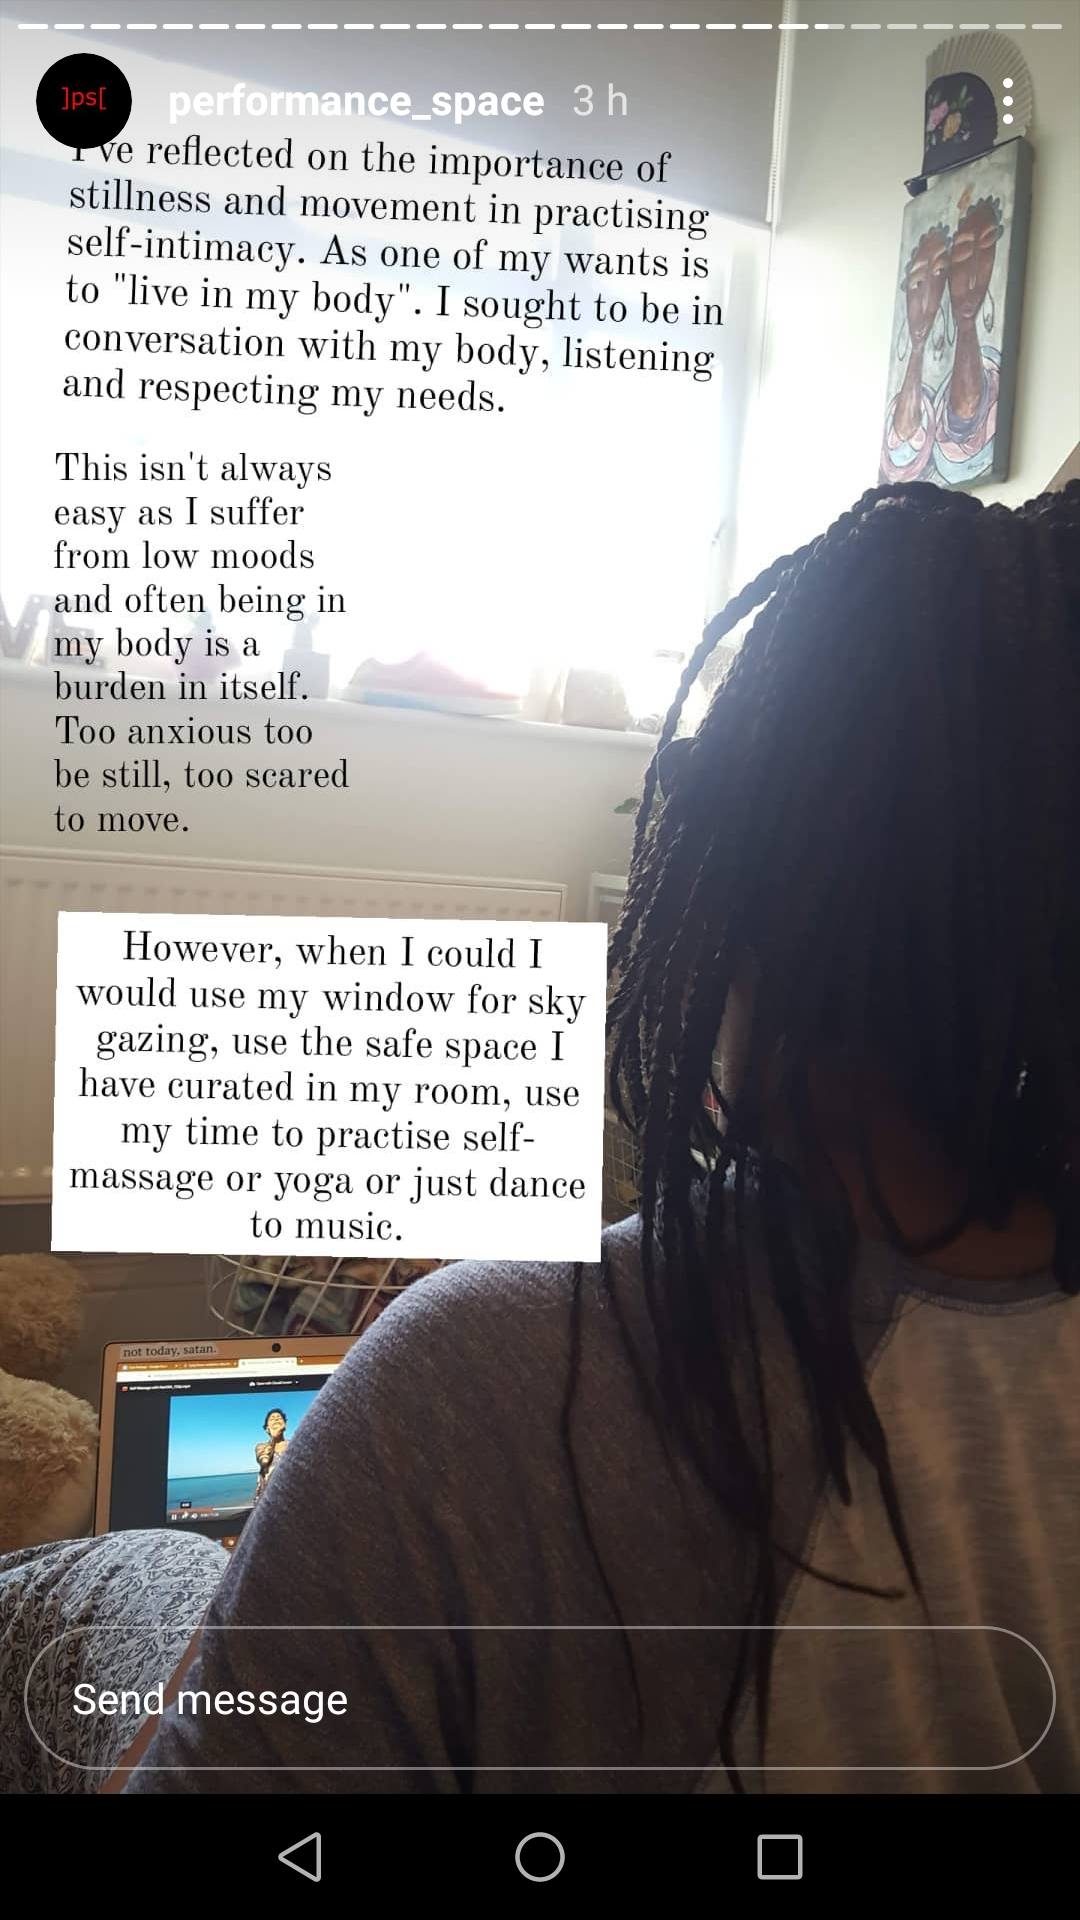 A partial selfie of the artist in their room, with texts reflecting on 'living in a body'